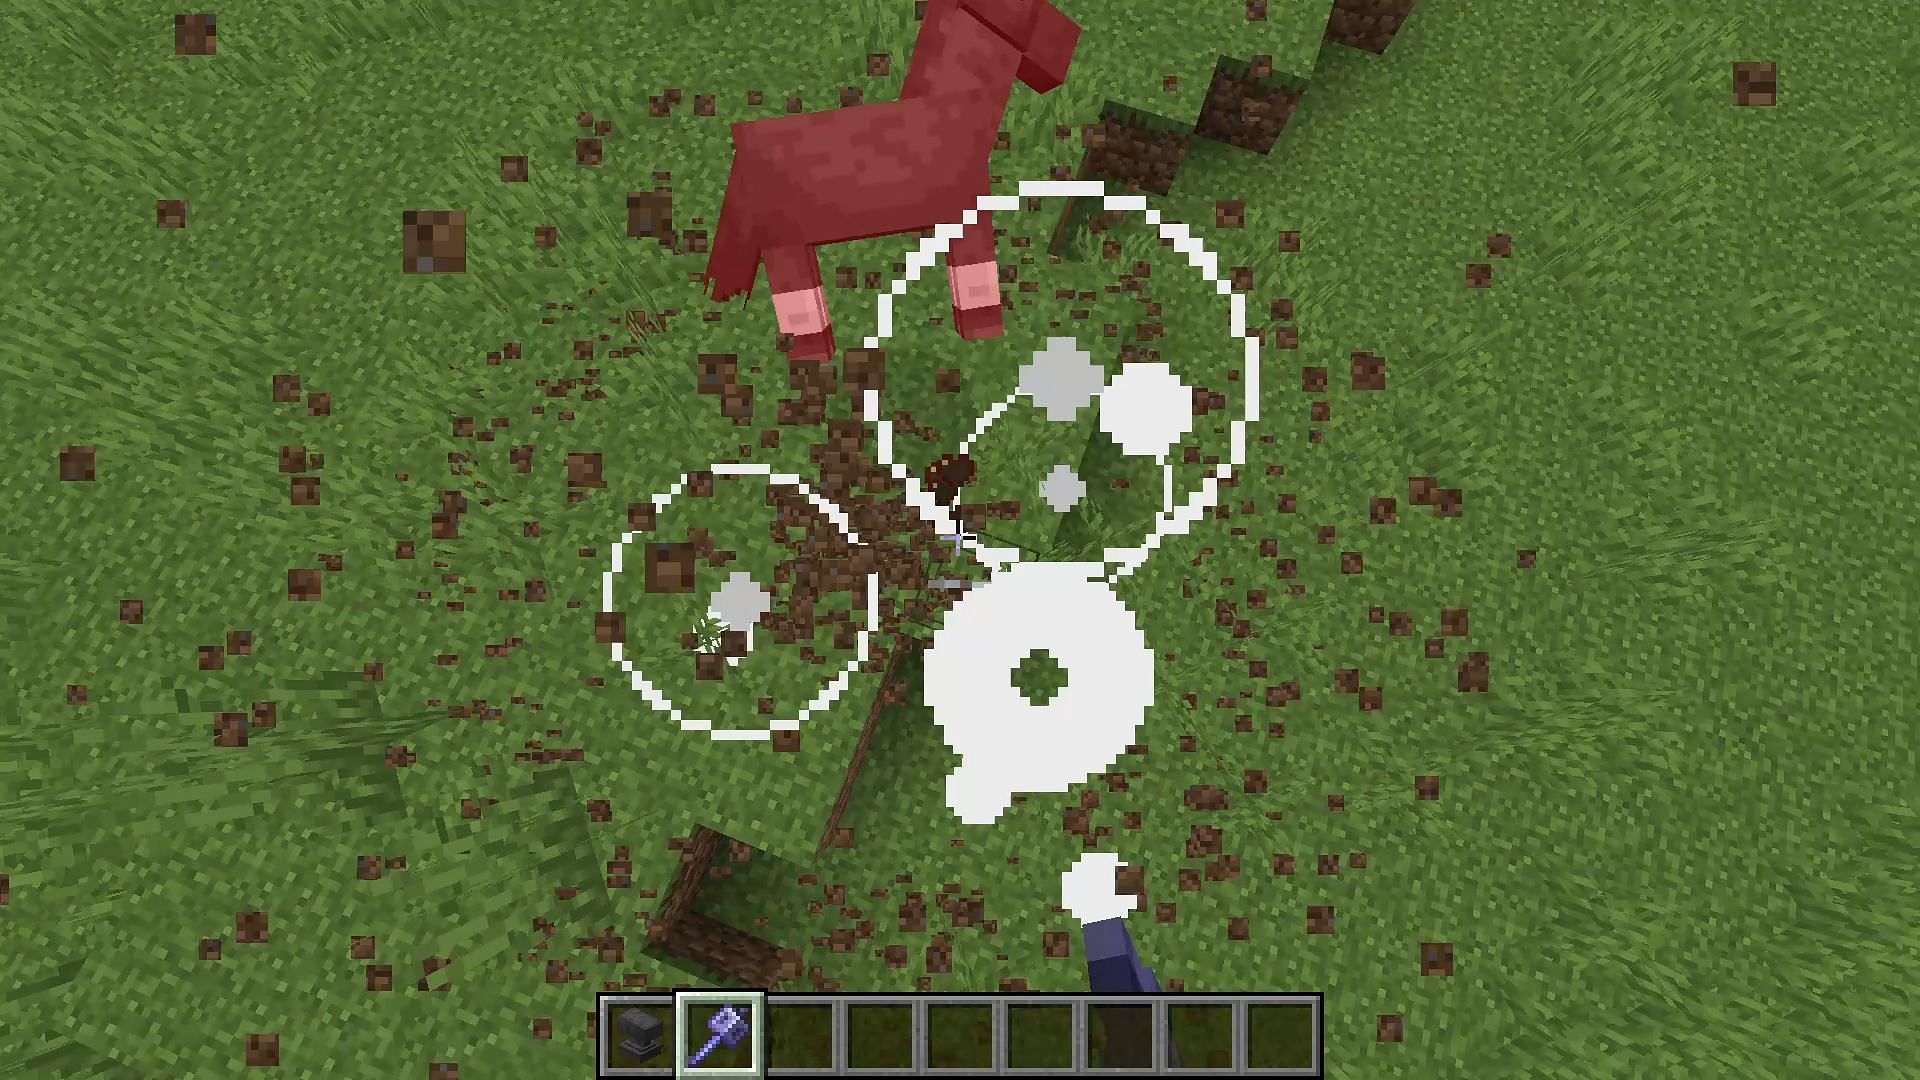 The wind burst enchantment creates a burst of air when the mace hits an entity in Minecraft (Image via Mojang Studios)